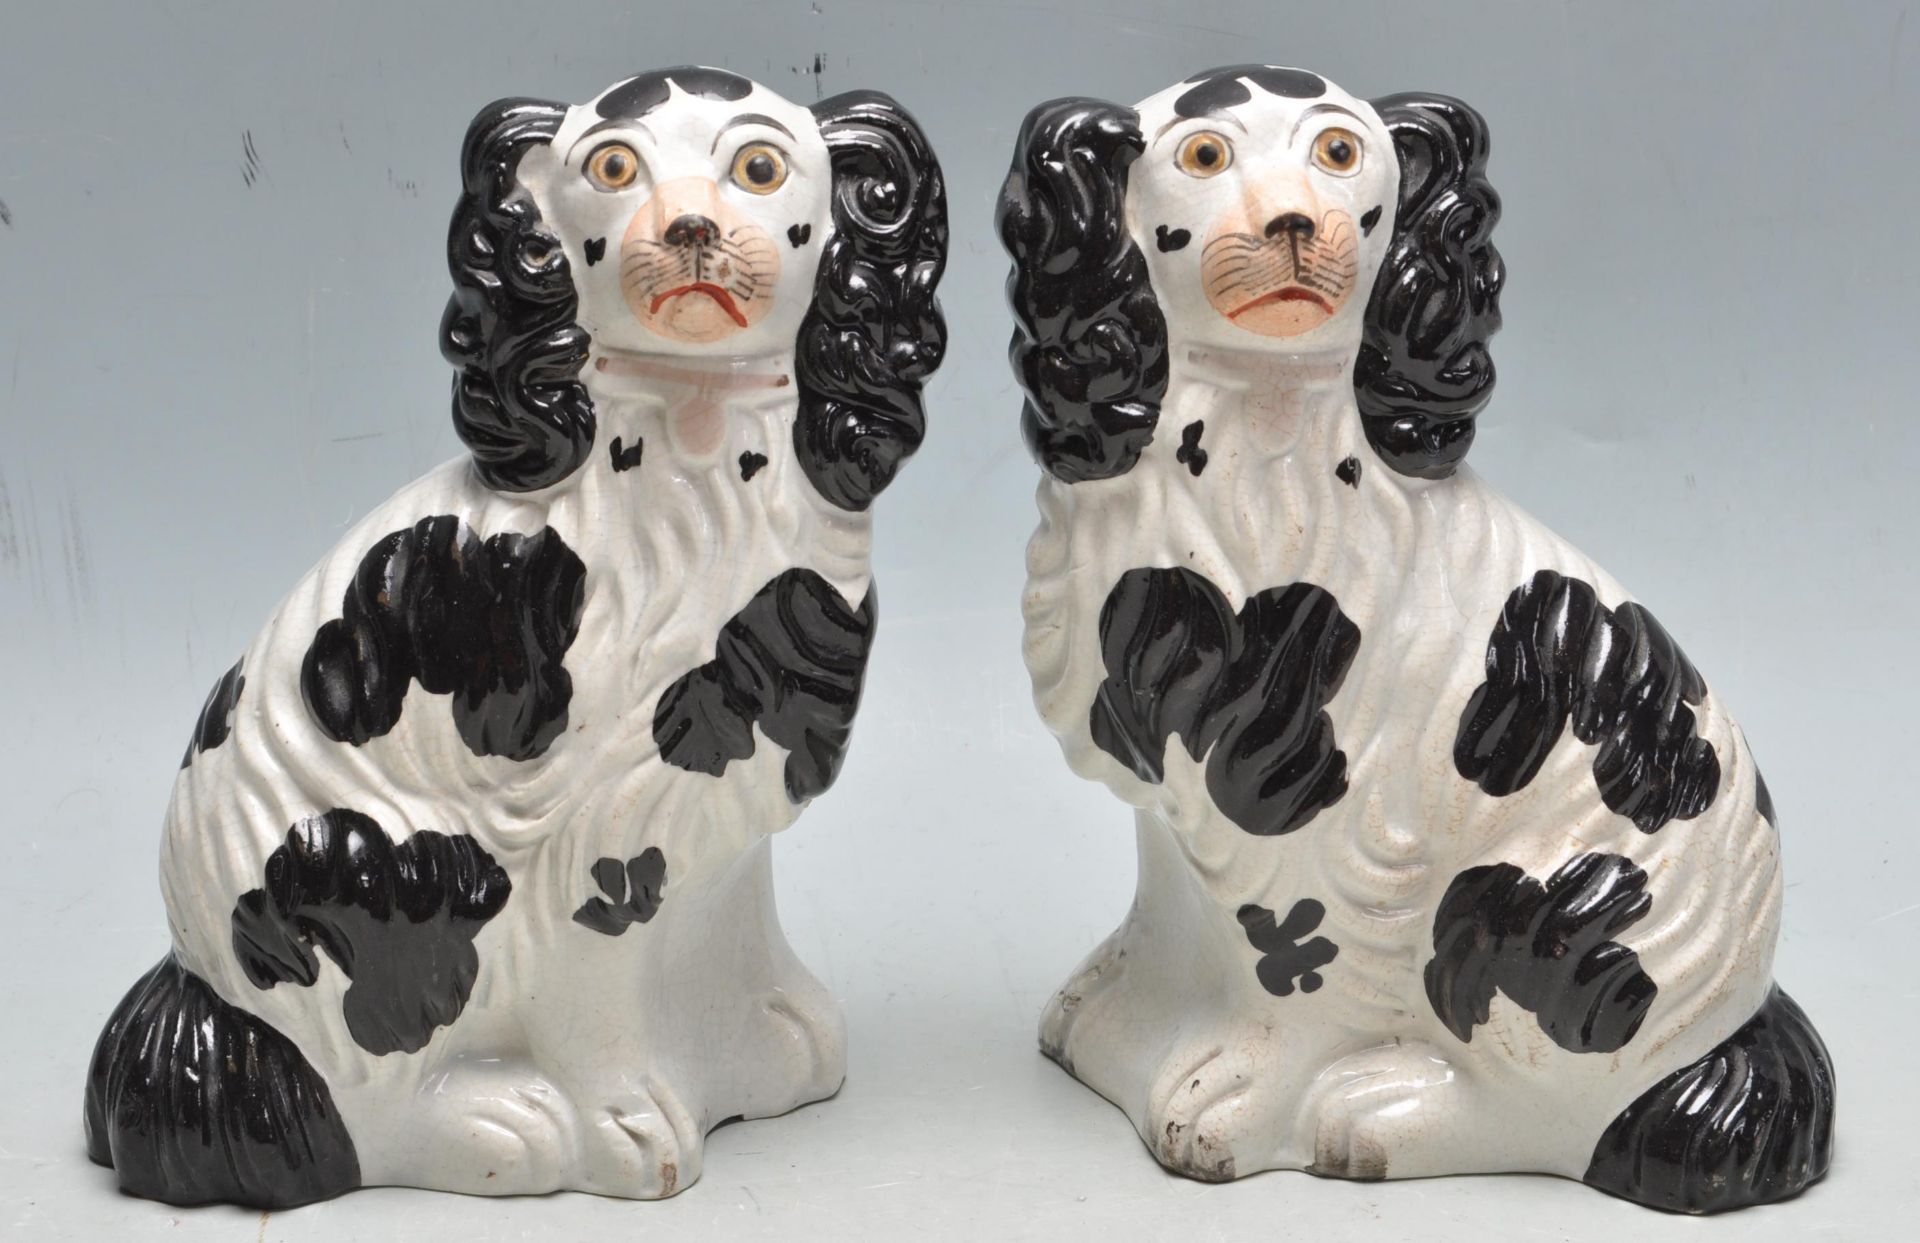 TWO PAIRS OF CERAMIC ANTIQUE STAFFORDSHIRE SPANIEL DOGS - Image 5 of 9